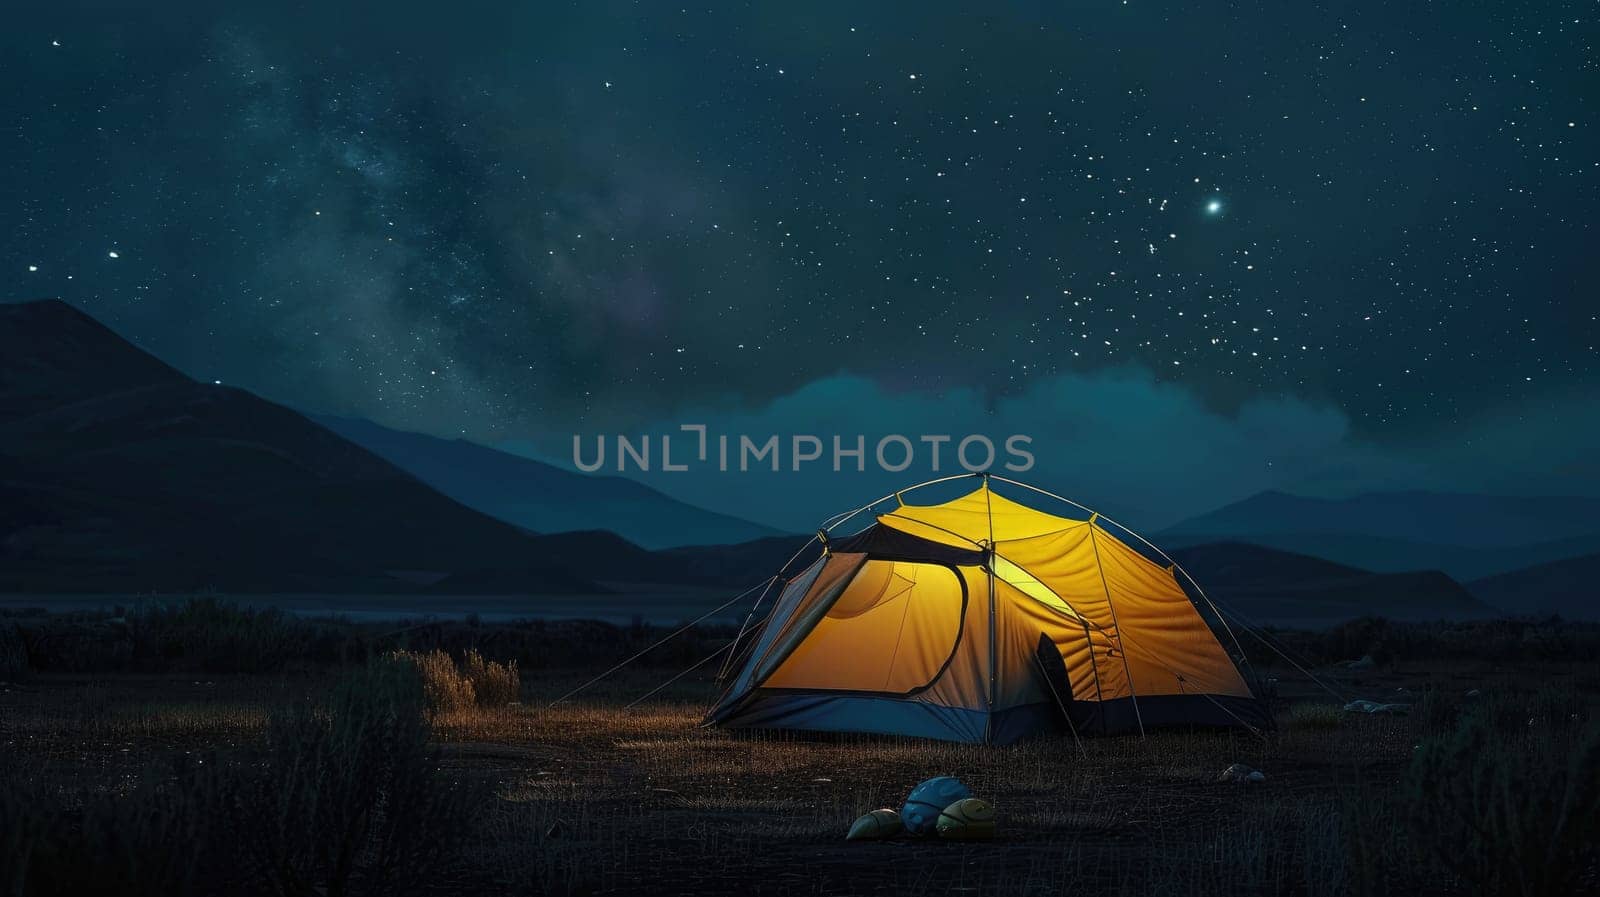 Tent is lit up on the field with a beautiful night sky and stars above.